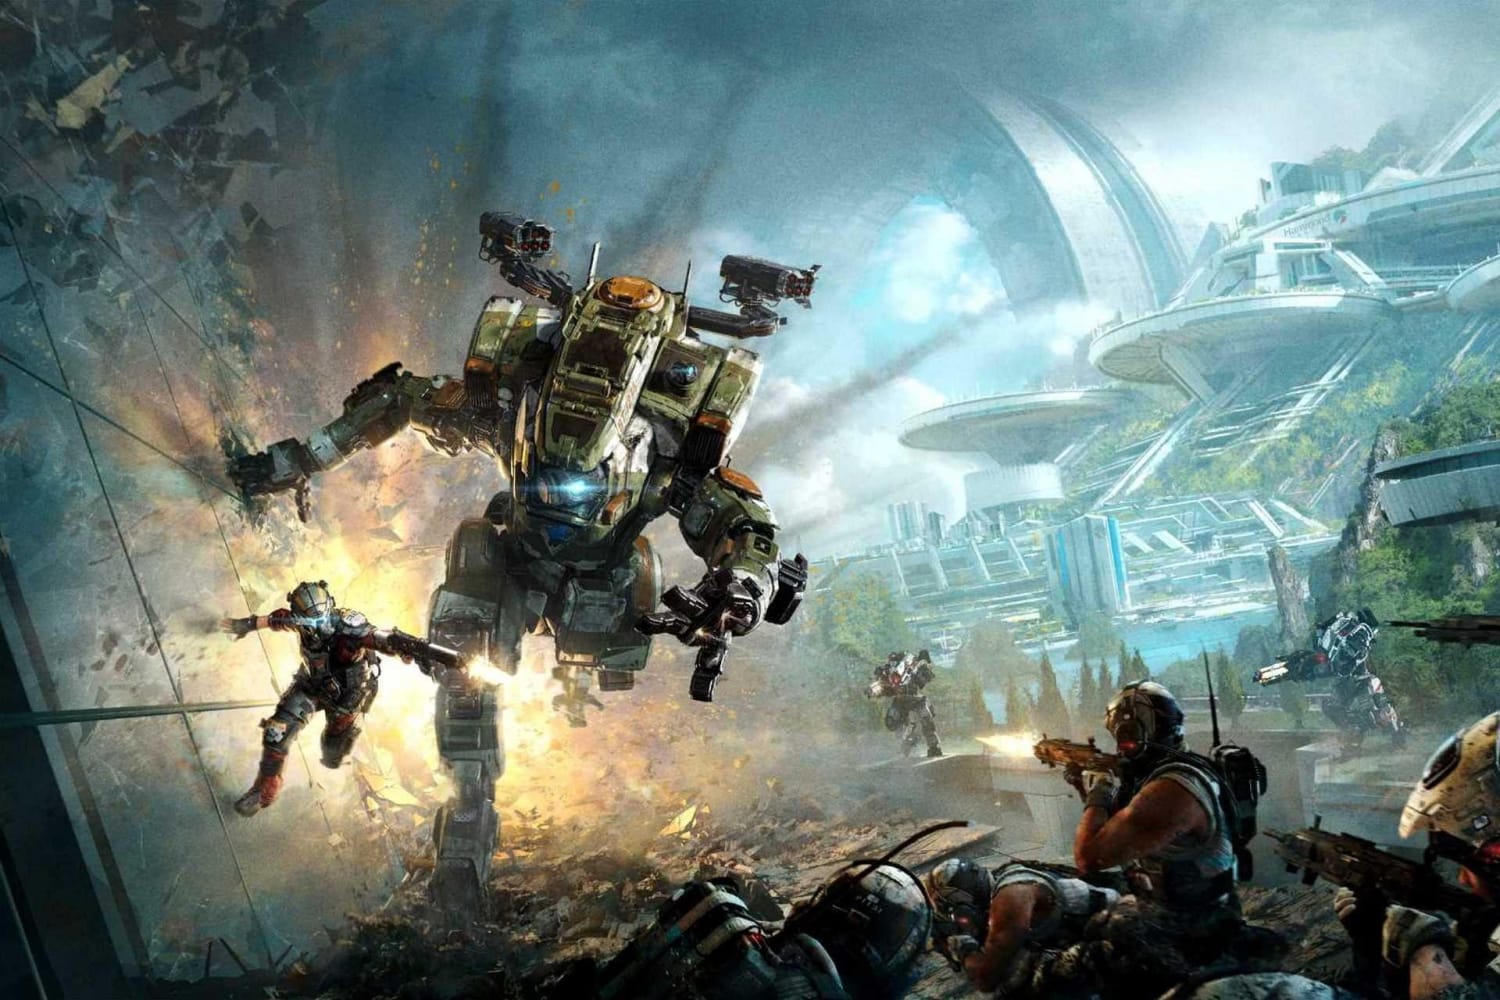 Thoughts: Titanfall 2